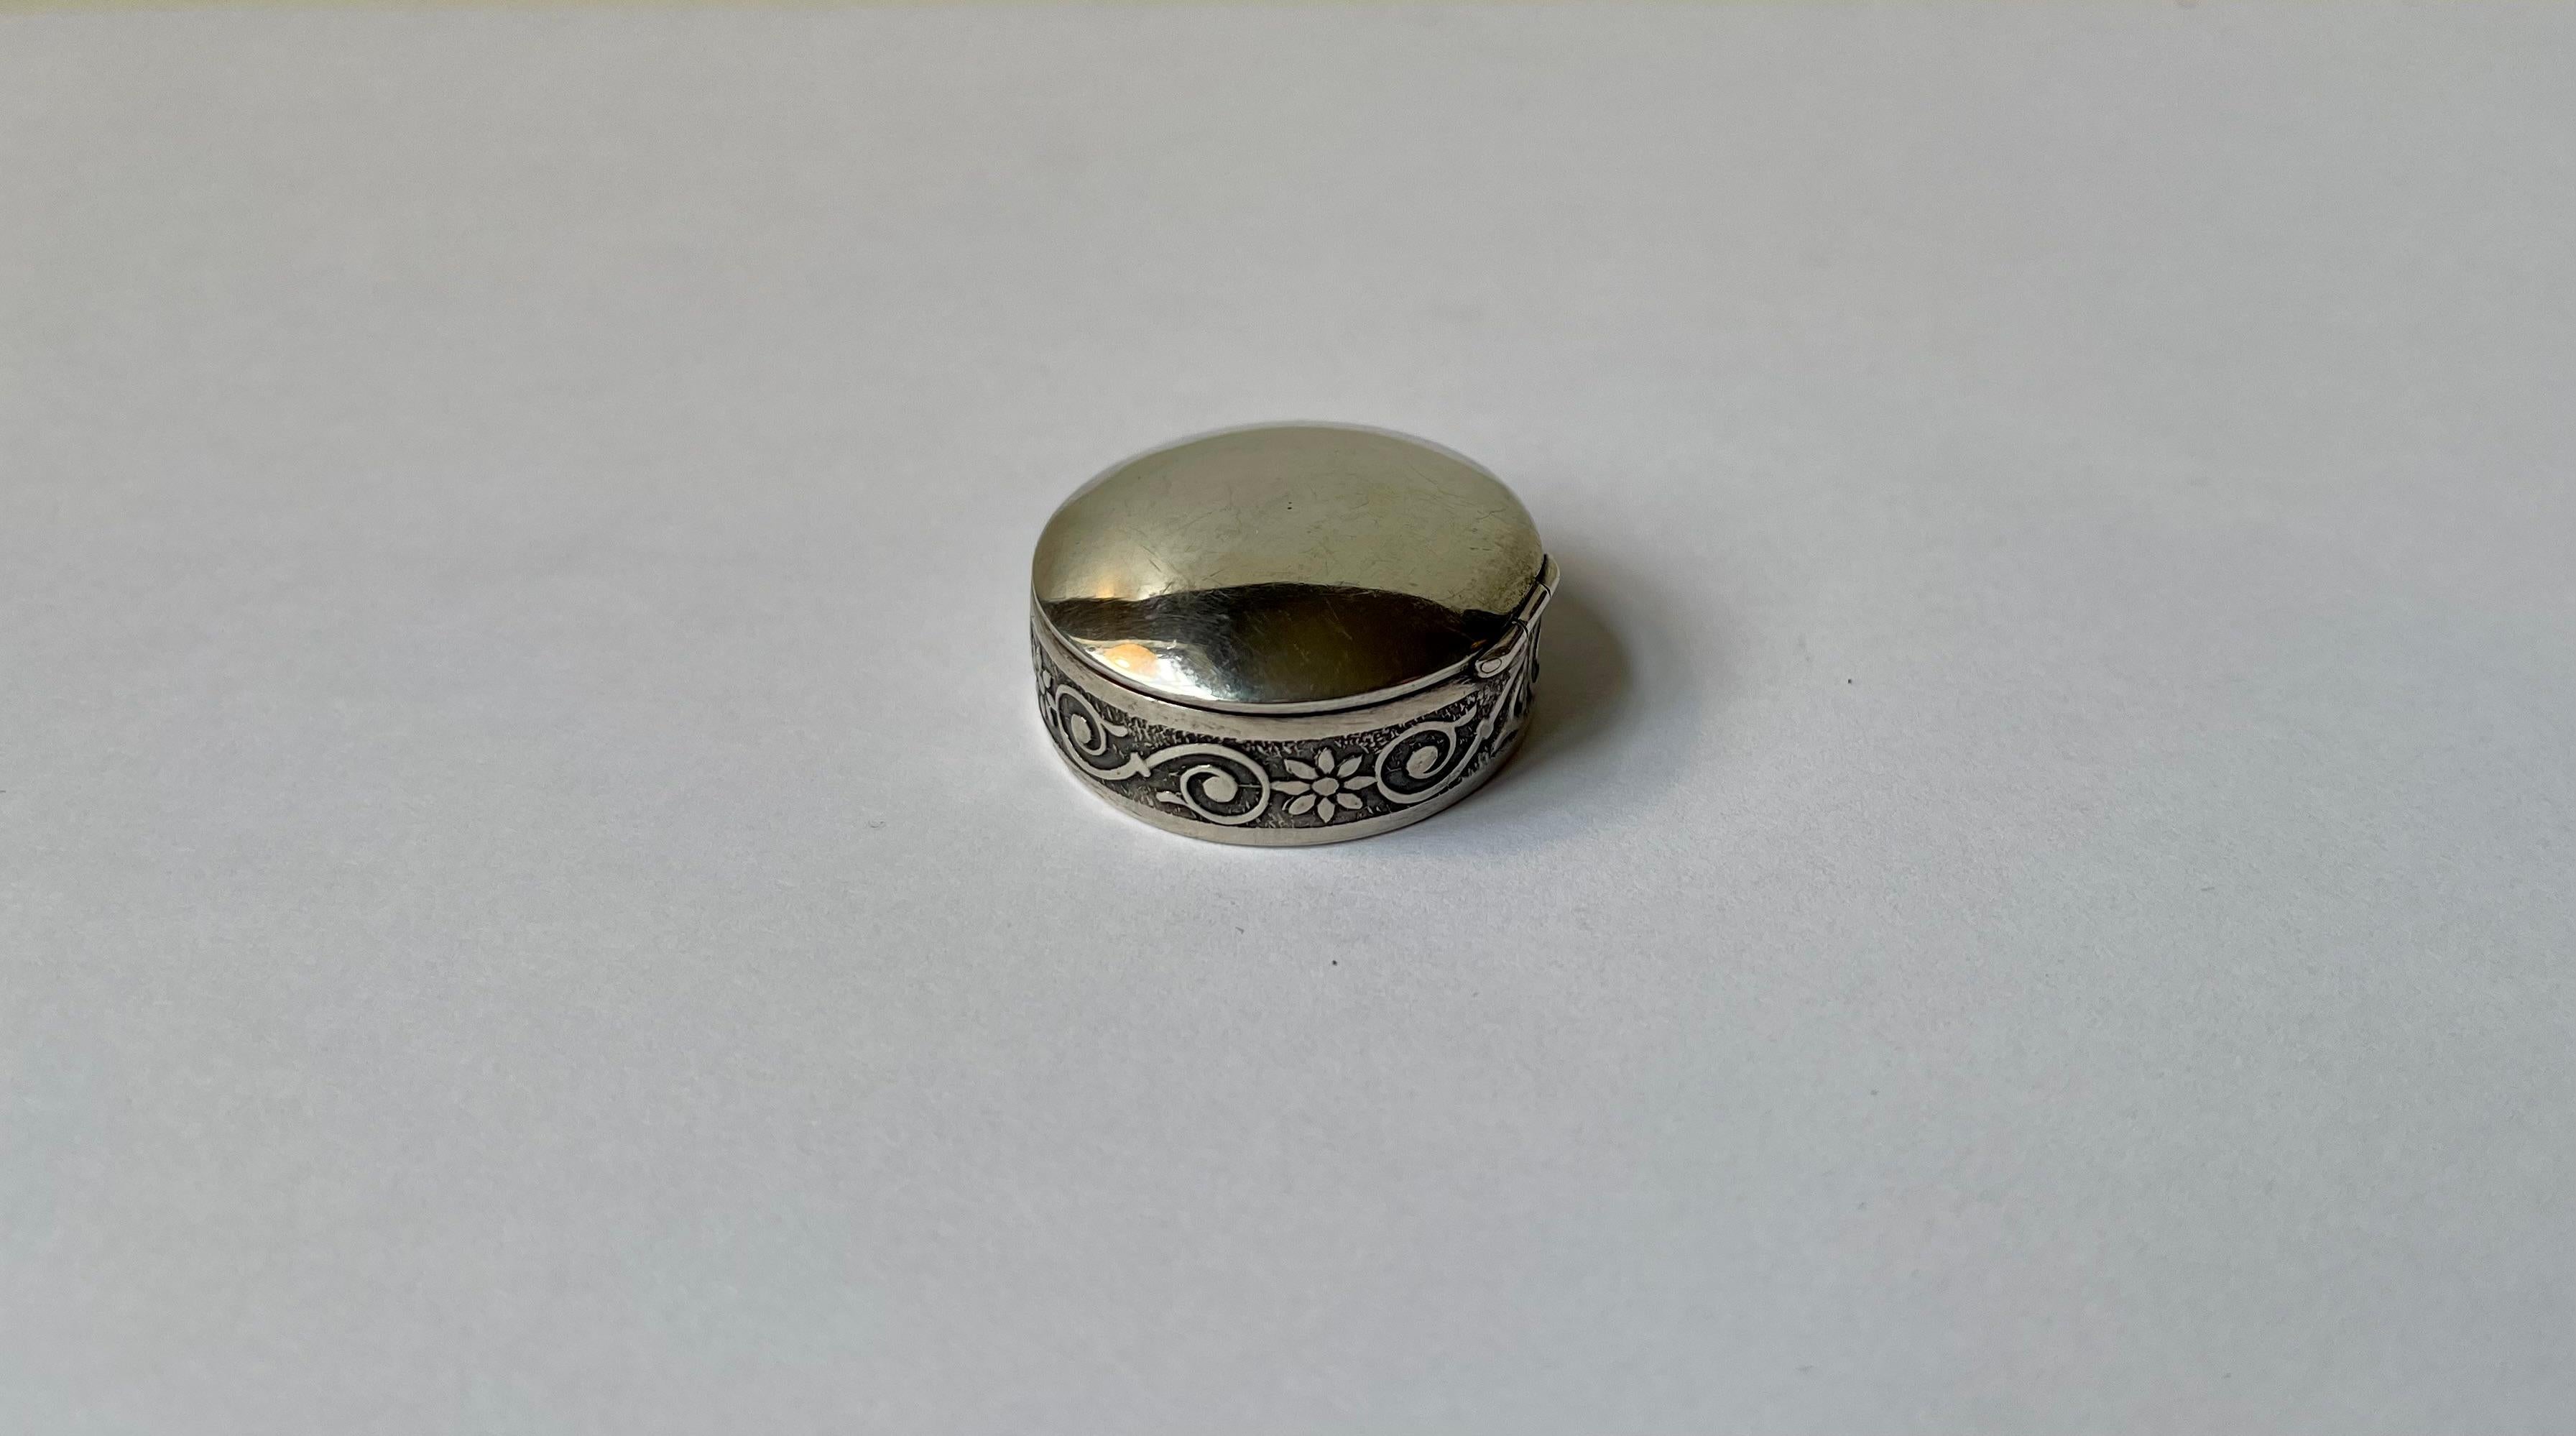 Small hand-edged/cut 925 sterling silver wedding ring or pill box. Linen with green velvet. Made in Denmark during the 1950s or 60s by Silversmith J. A. Christensen. Hall-marked and signed with initials. Measurements: D: 32 mm, H: 12 mm.